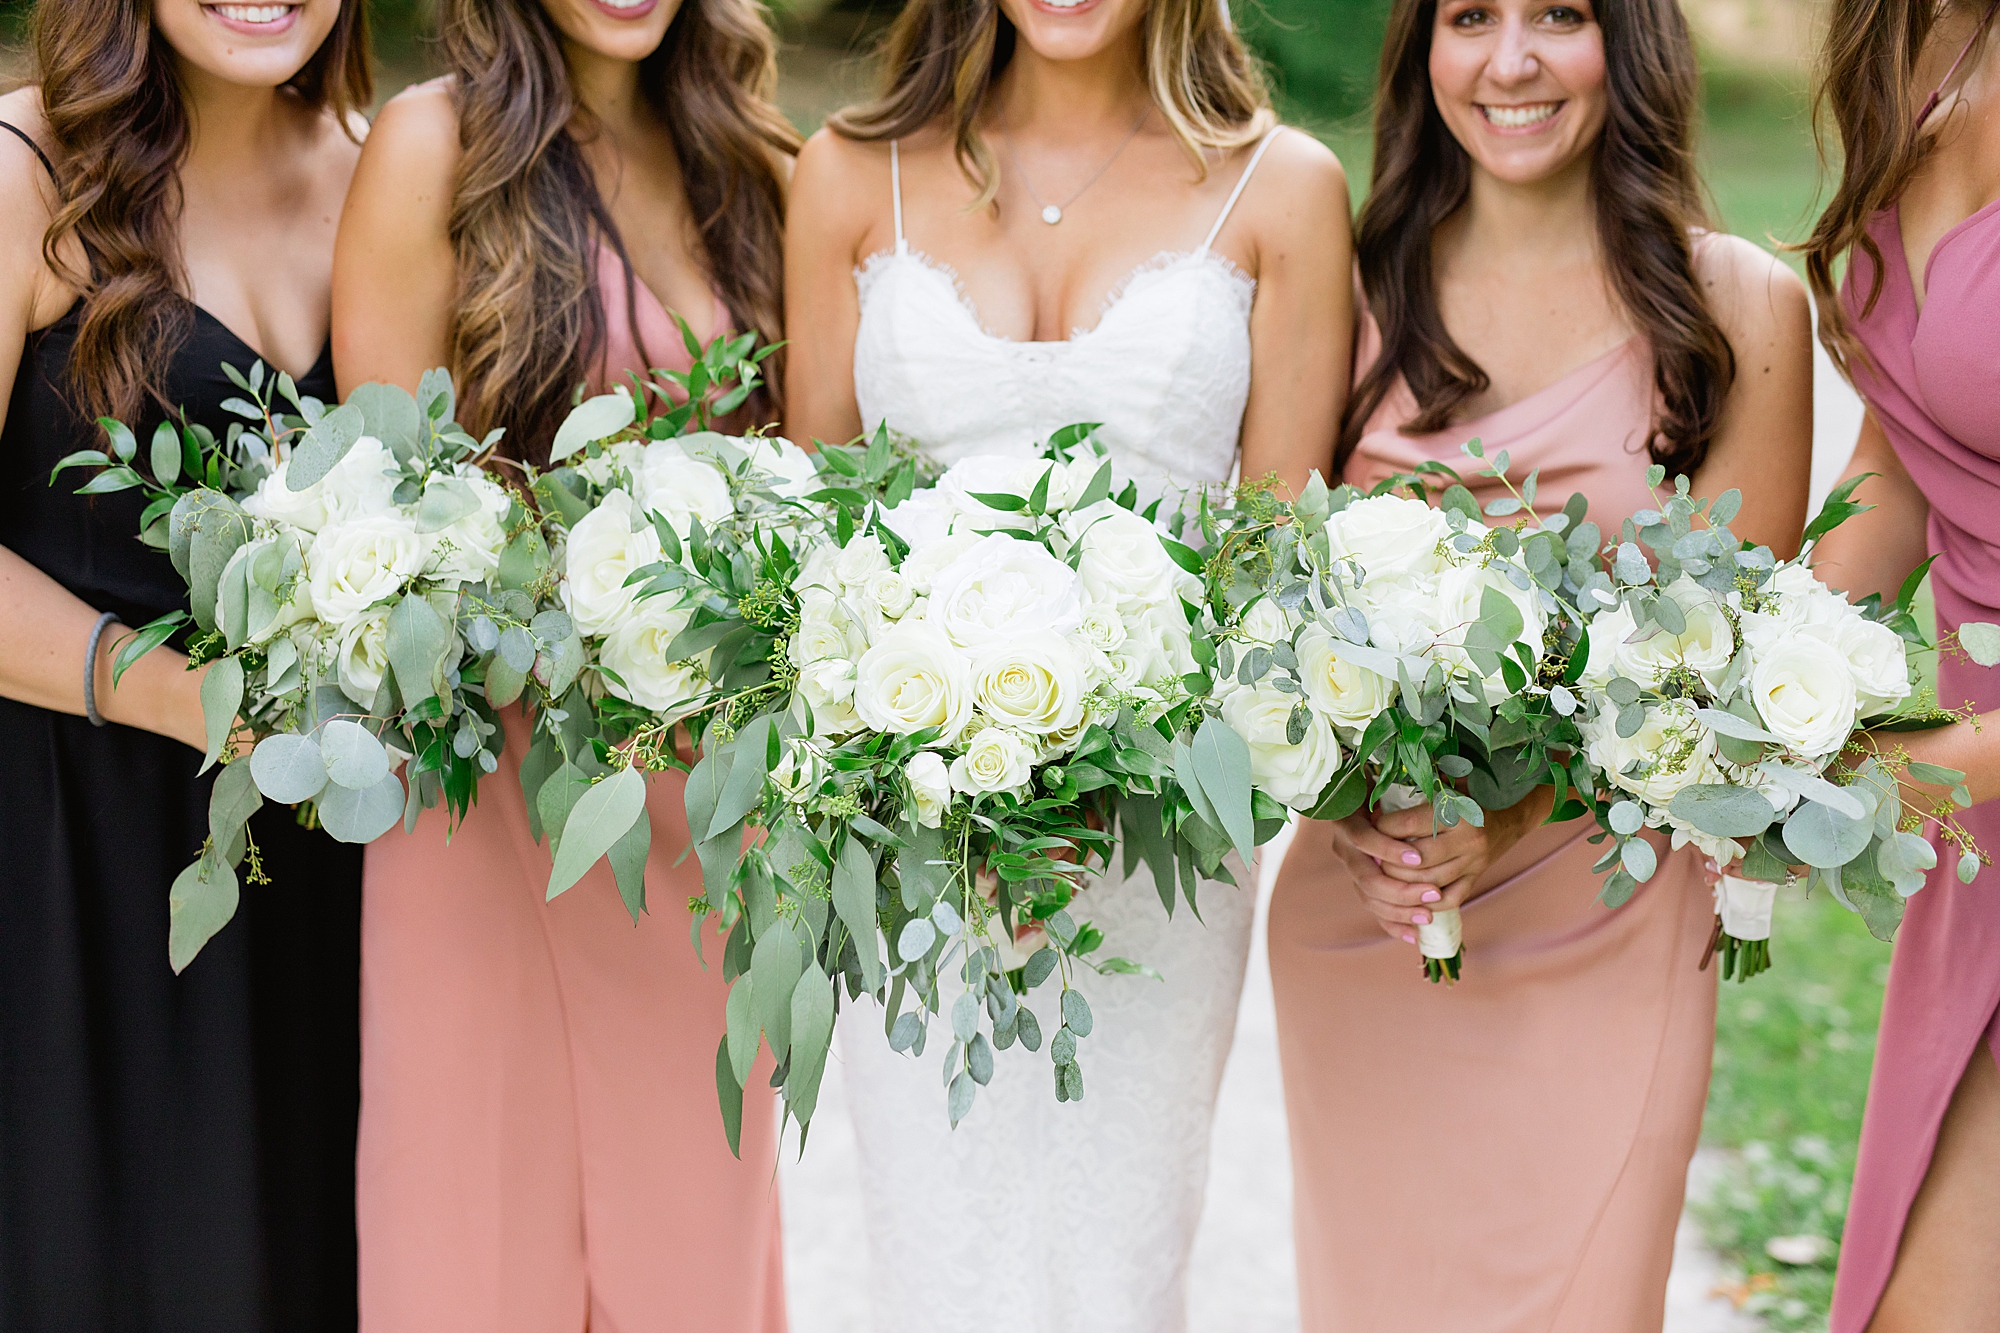 A summer Detroit micro wedding by Breanne Rochelle Photography.